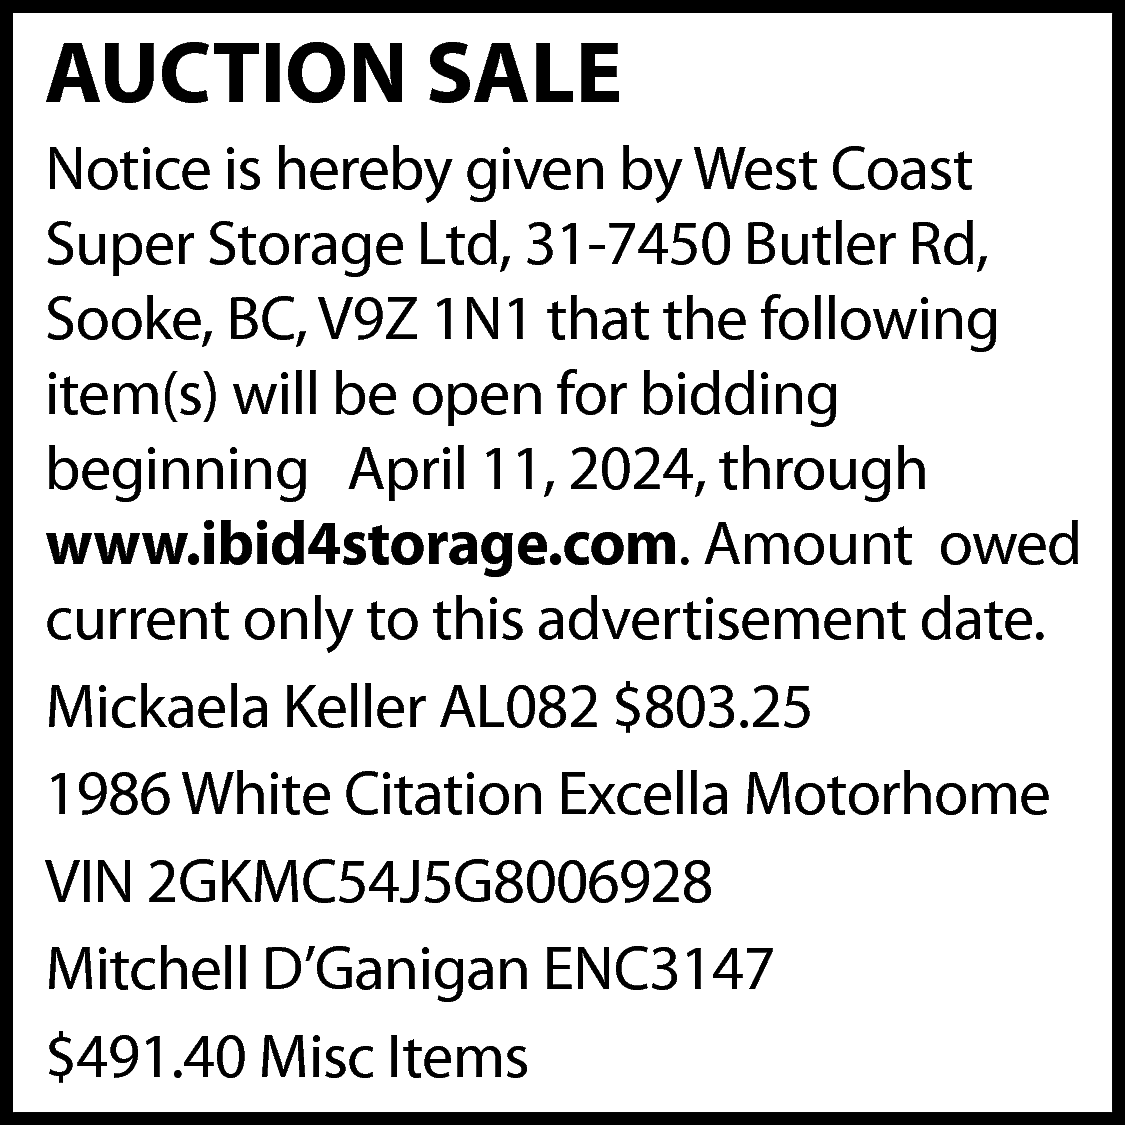 AUCTION SALE <br>Notice is hereby  AUCTION SALE  Notice is hereby given by West Coast  Super Storage Ltd, 31-7450 Butler Rd,  Sooke, BC, V9Z 1N1 that the following  item(s) will be open for bidding  beginning April 11, 2024, through  www.ibid4storage.com. Amount owed  current only to this advertisement date.  Mickaela Keller AL082 $803.25  1986 White Citation Excella Motorhome  VIN 2GKMC54J5G8006928  Mitchell D’Ganigan ENC3147  $491.40 Misc Items    